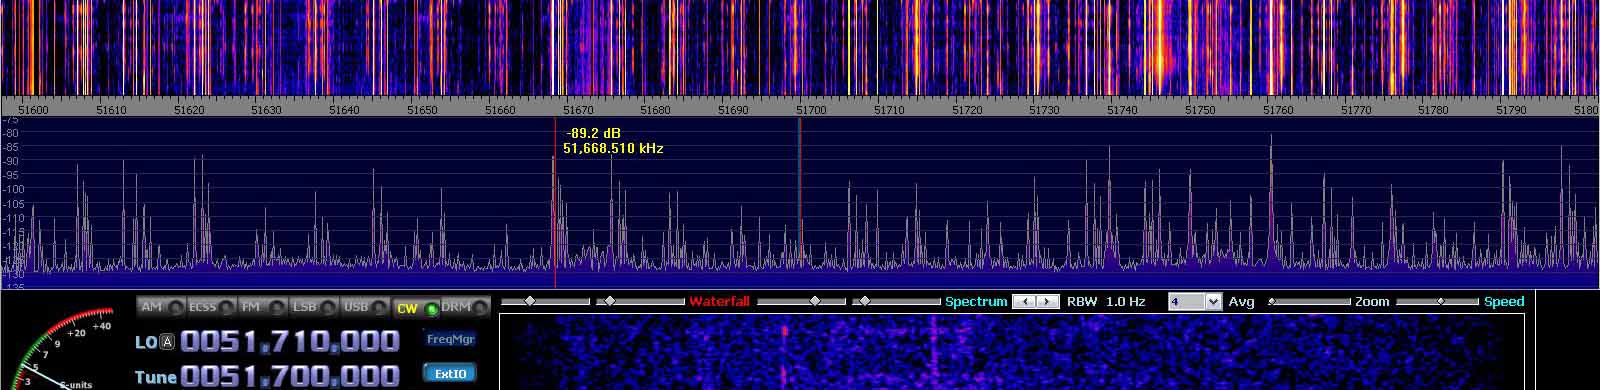 2014-07-04 51.700 MHz +- 100 kHz - Strong Es - 4-el dipole array with ends to St P - (c) OH7HJ.JPG